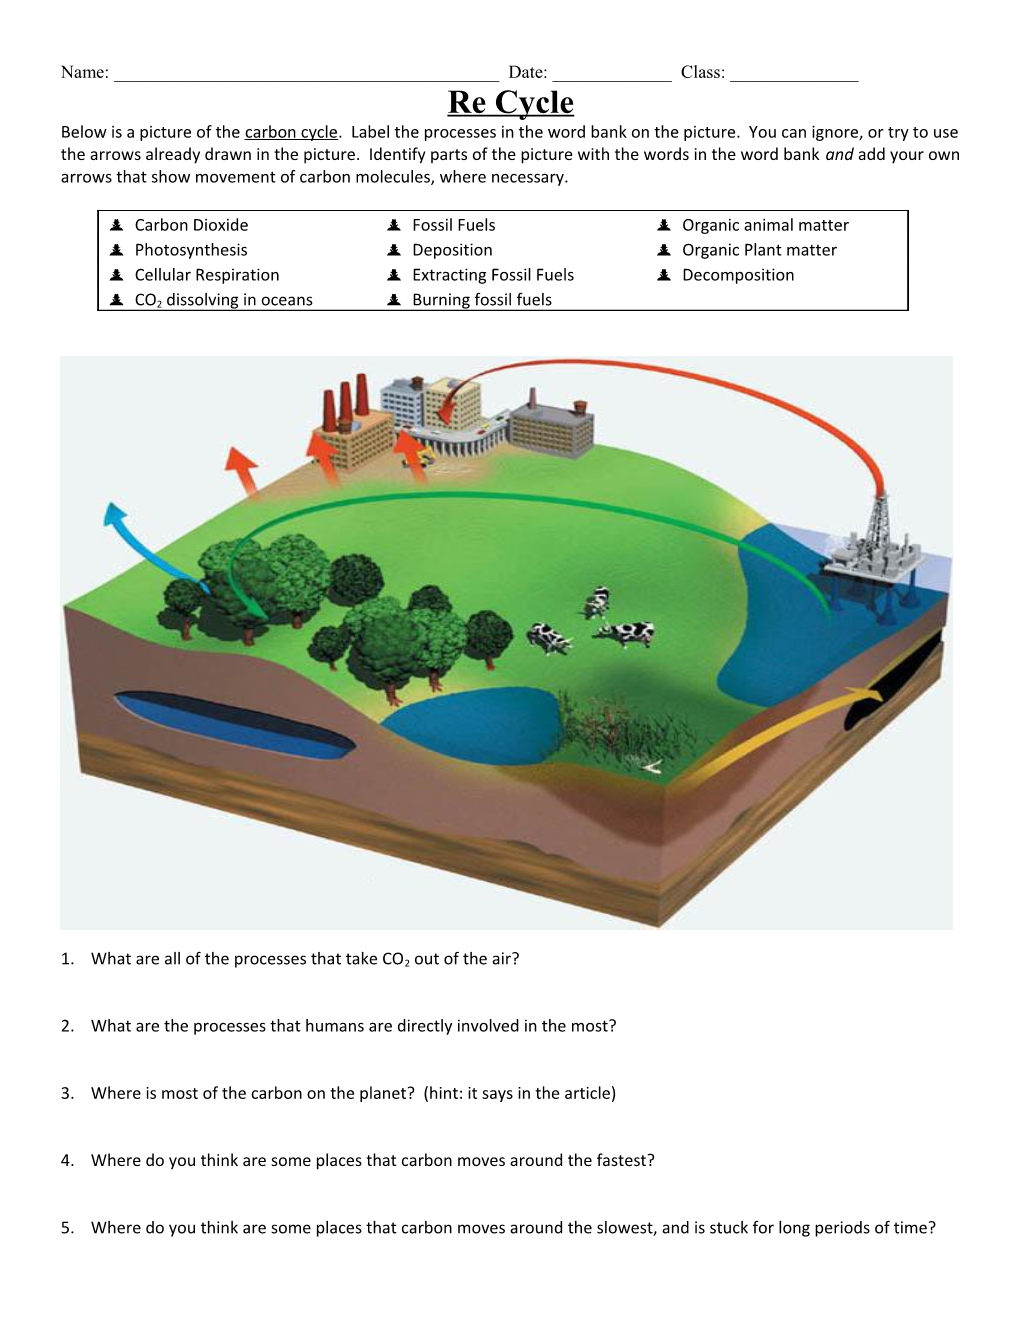 Below Is a Picture of the Carbon Cycle. Label the Processes in the Word Bank on the Picture